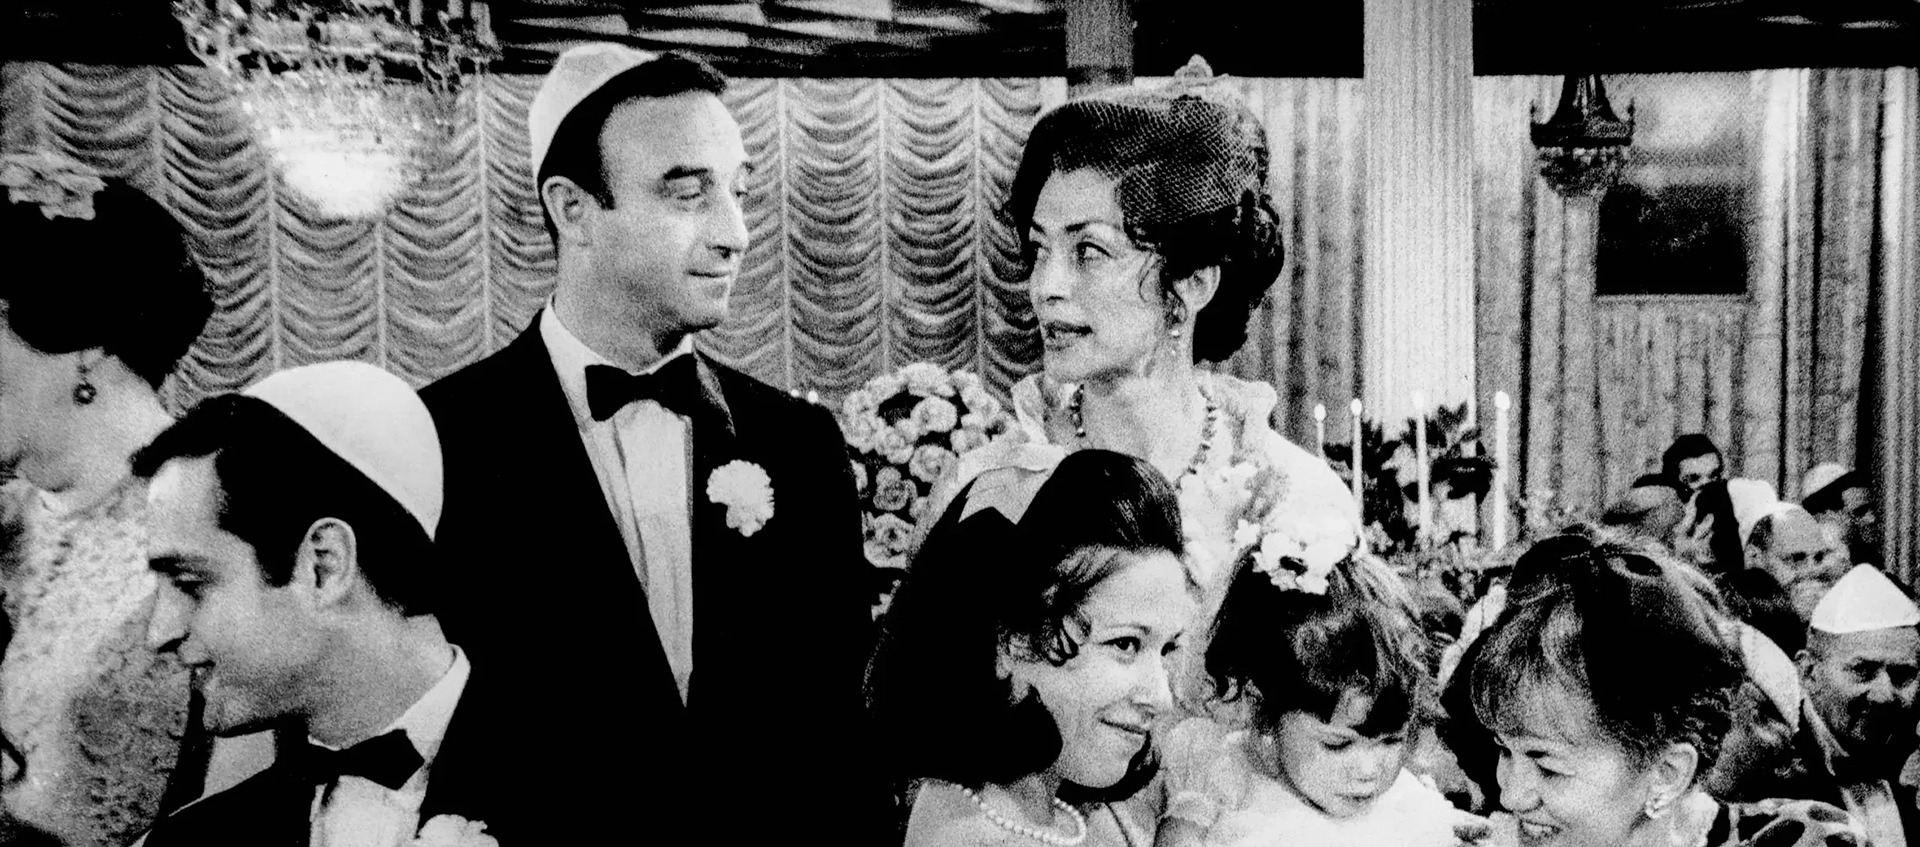 A large group of people gathered at a fancy party. The men are all wearing yarmulkes and tuxedos and the women are wearing dresses. 